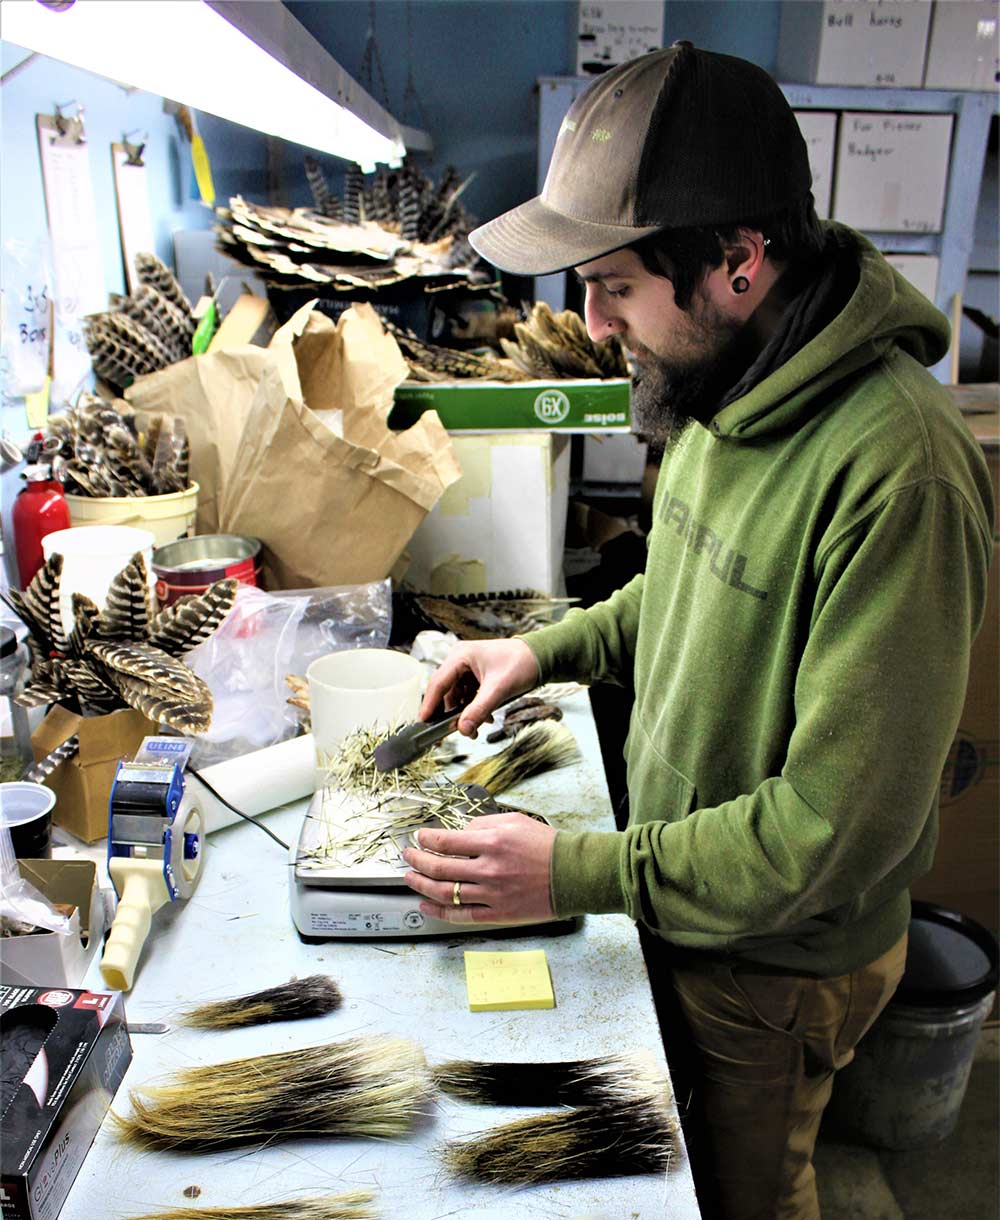 sorting quills of a porcupine